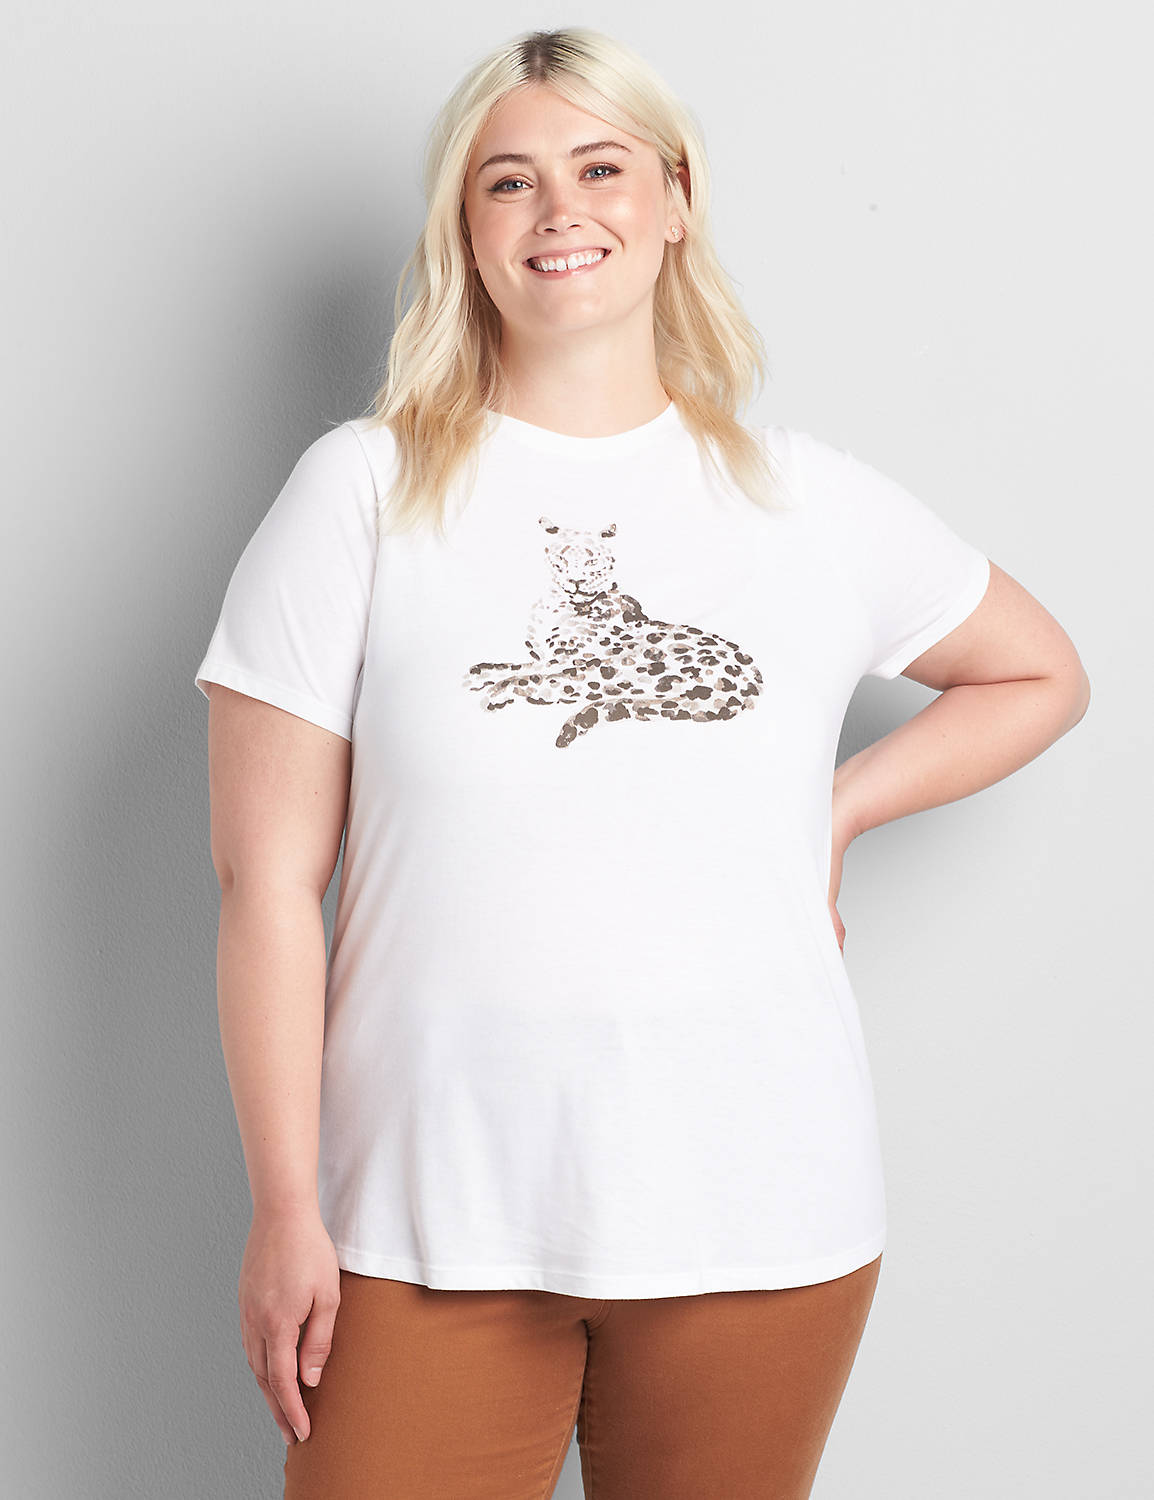 Lounging Cheetah Graphic Tee Product Image 1